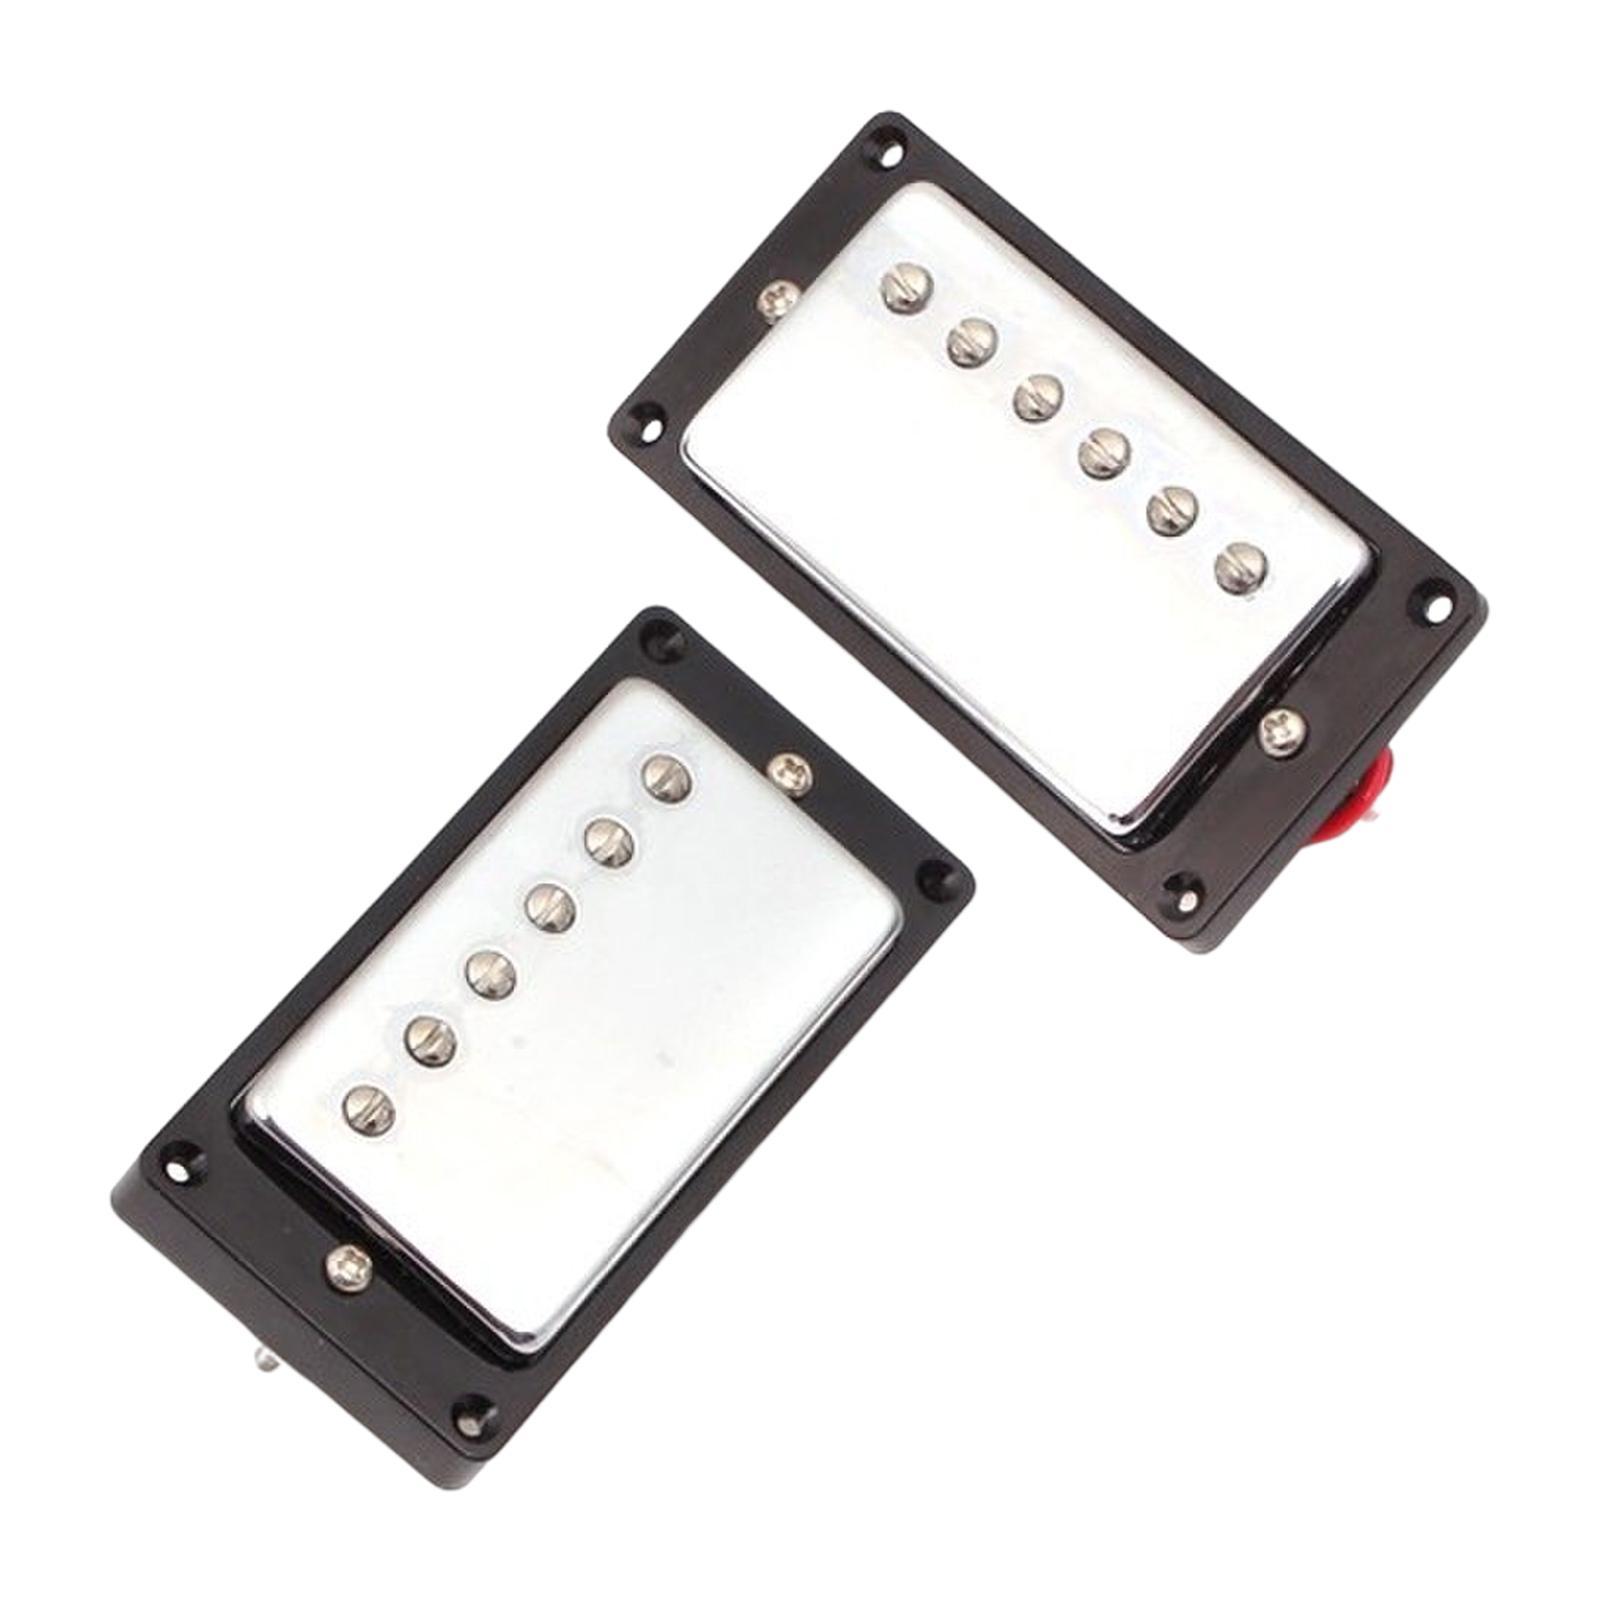 2 Pieces Double Coil Pickups Set for Electric Guitar Accessory Replacement